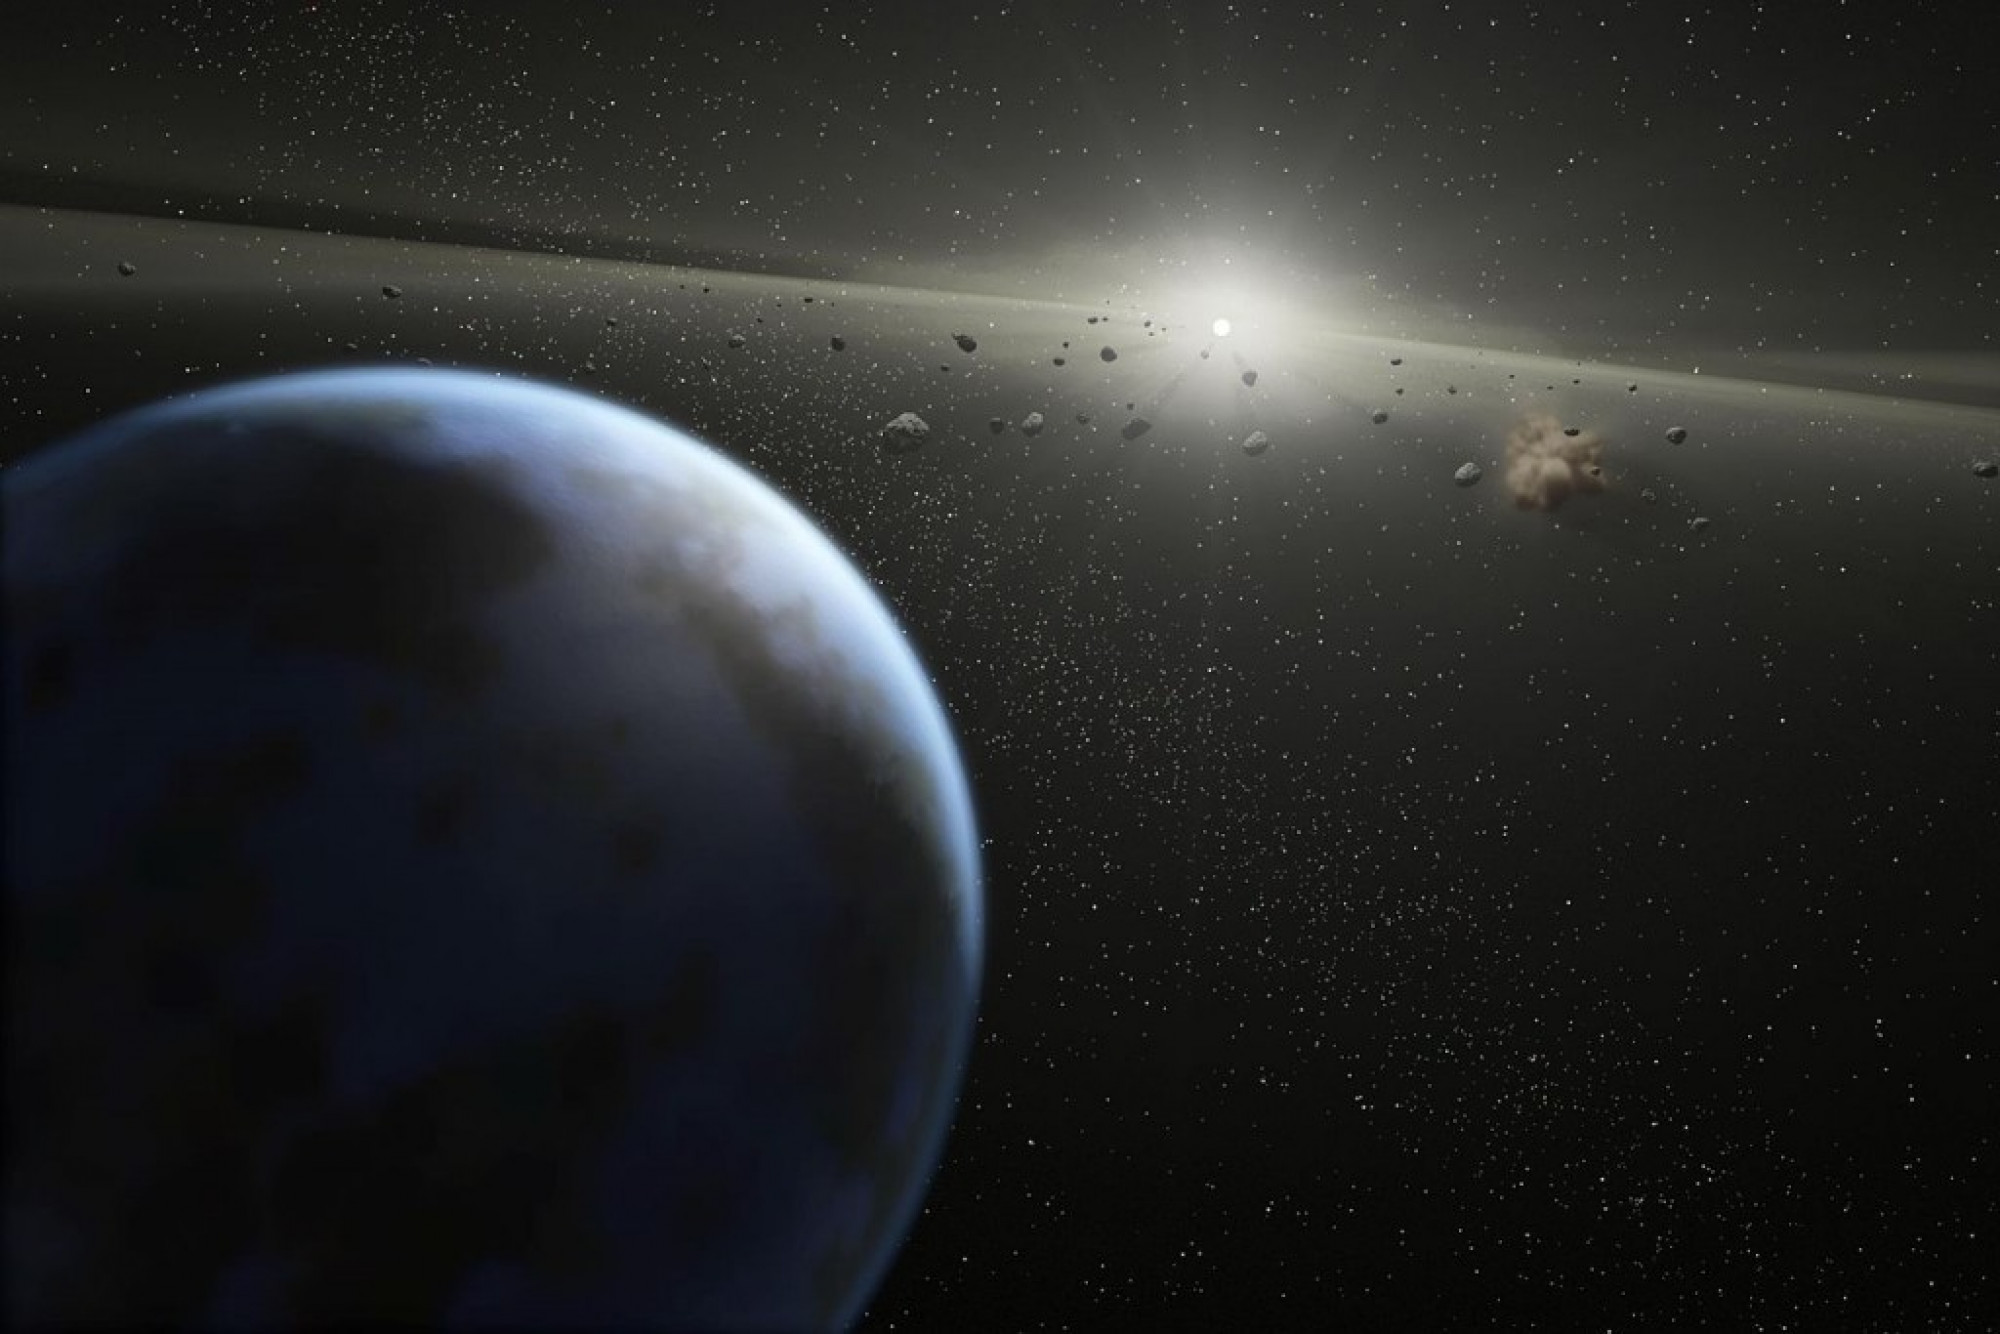 Asteroids passing the Earth